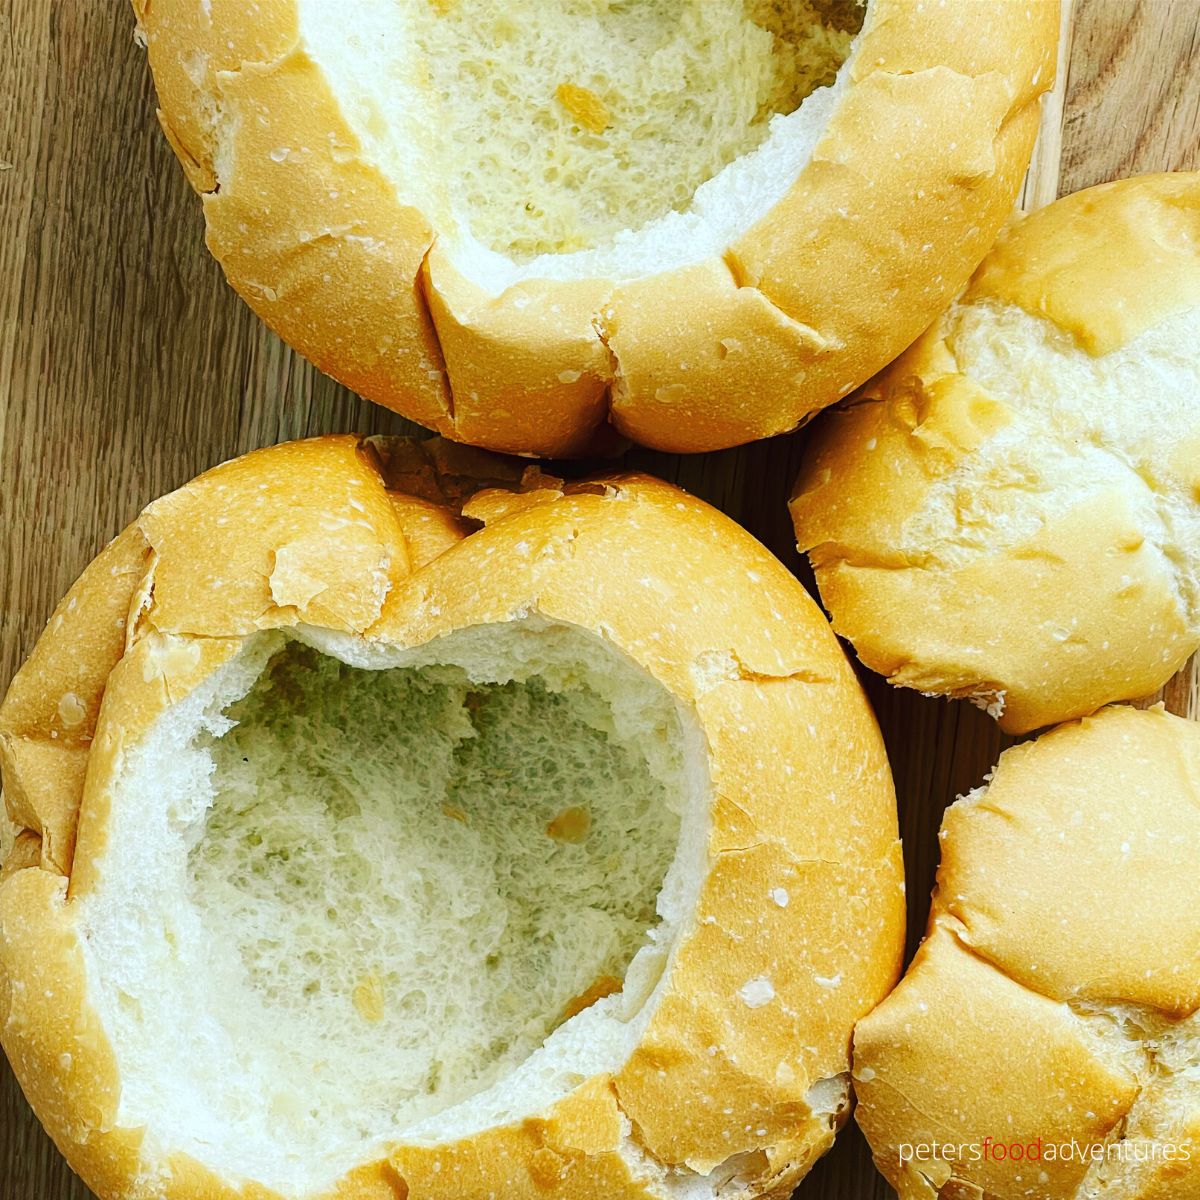 hollowed out bread bowls